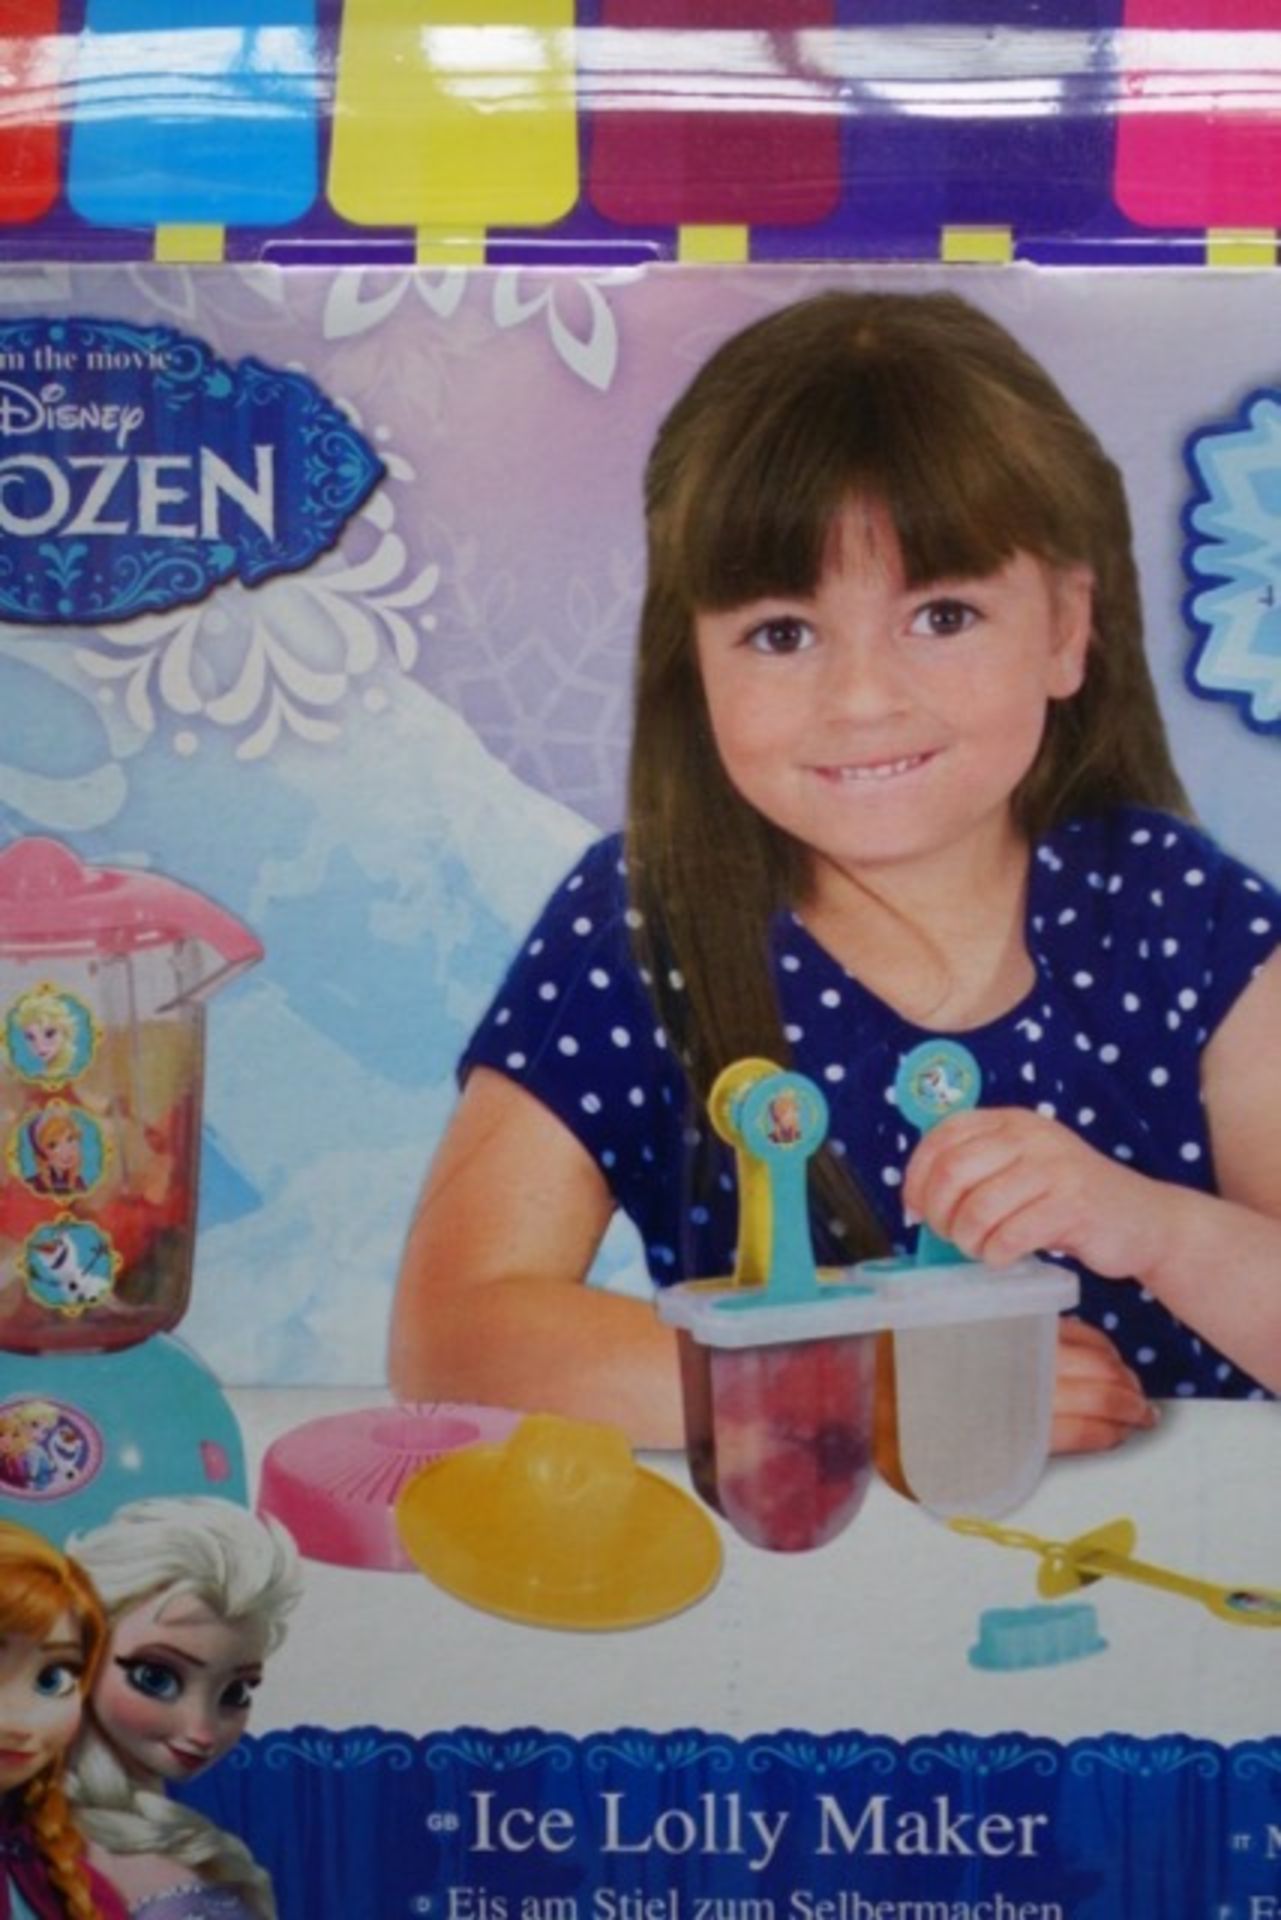 8 x Brand New Disney Frozen Ice Lolly Making Set's - Image 2 of 3